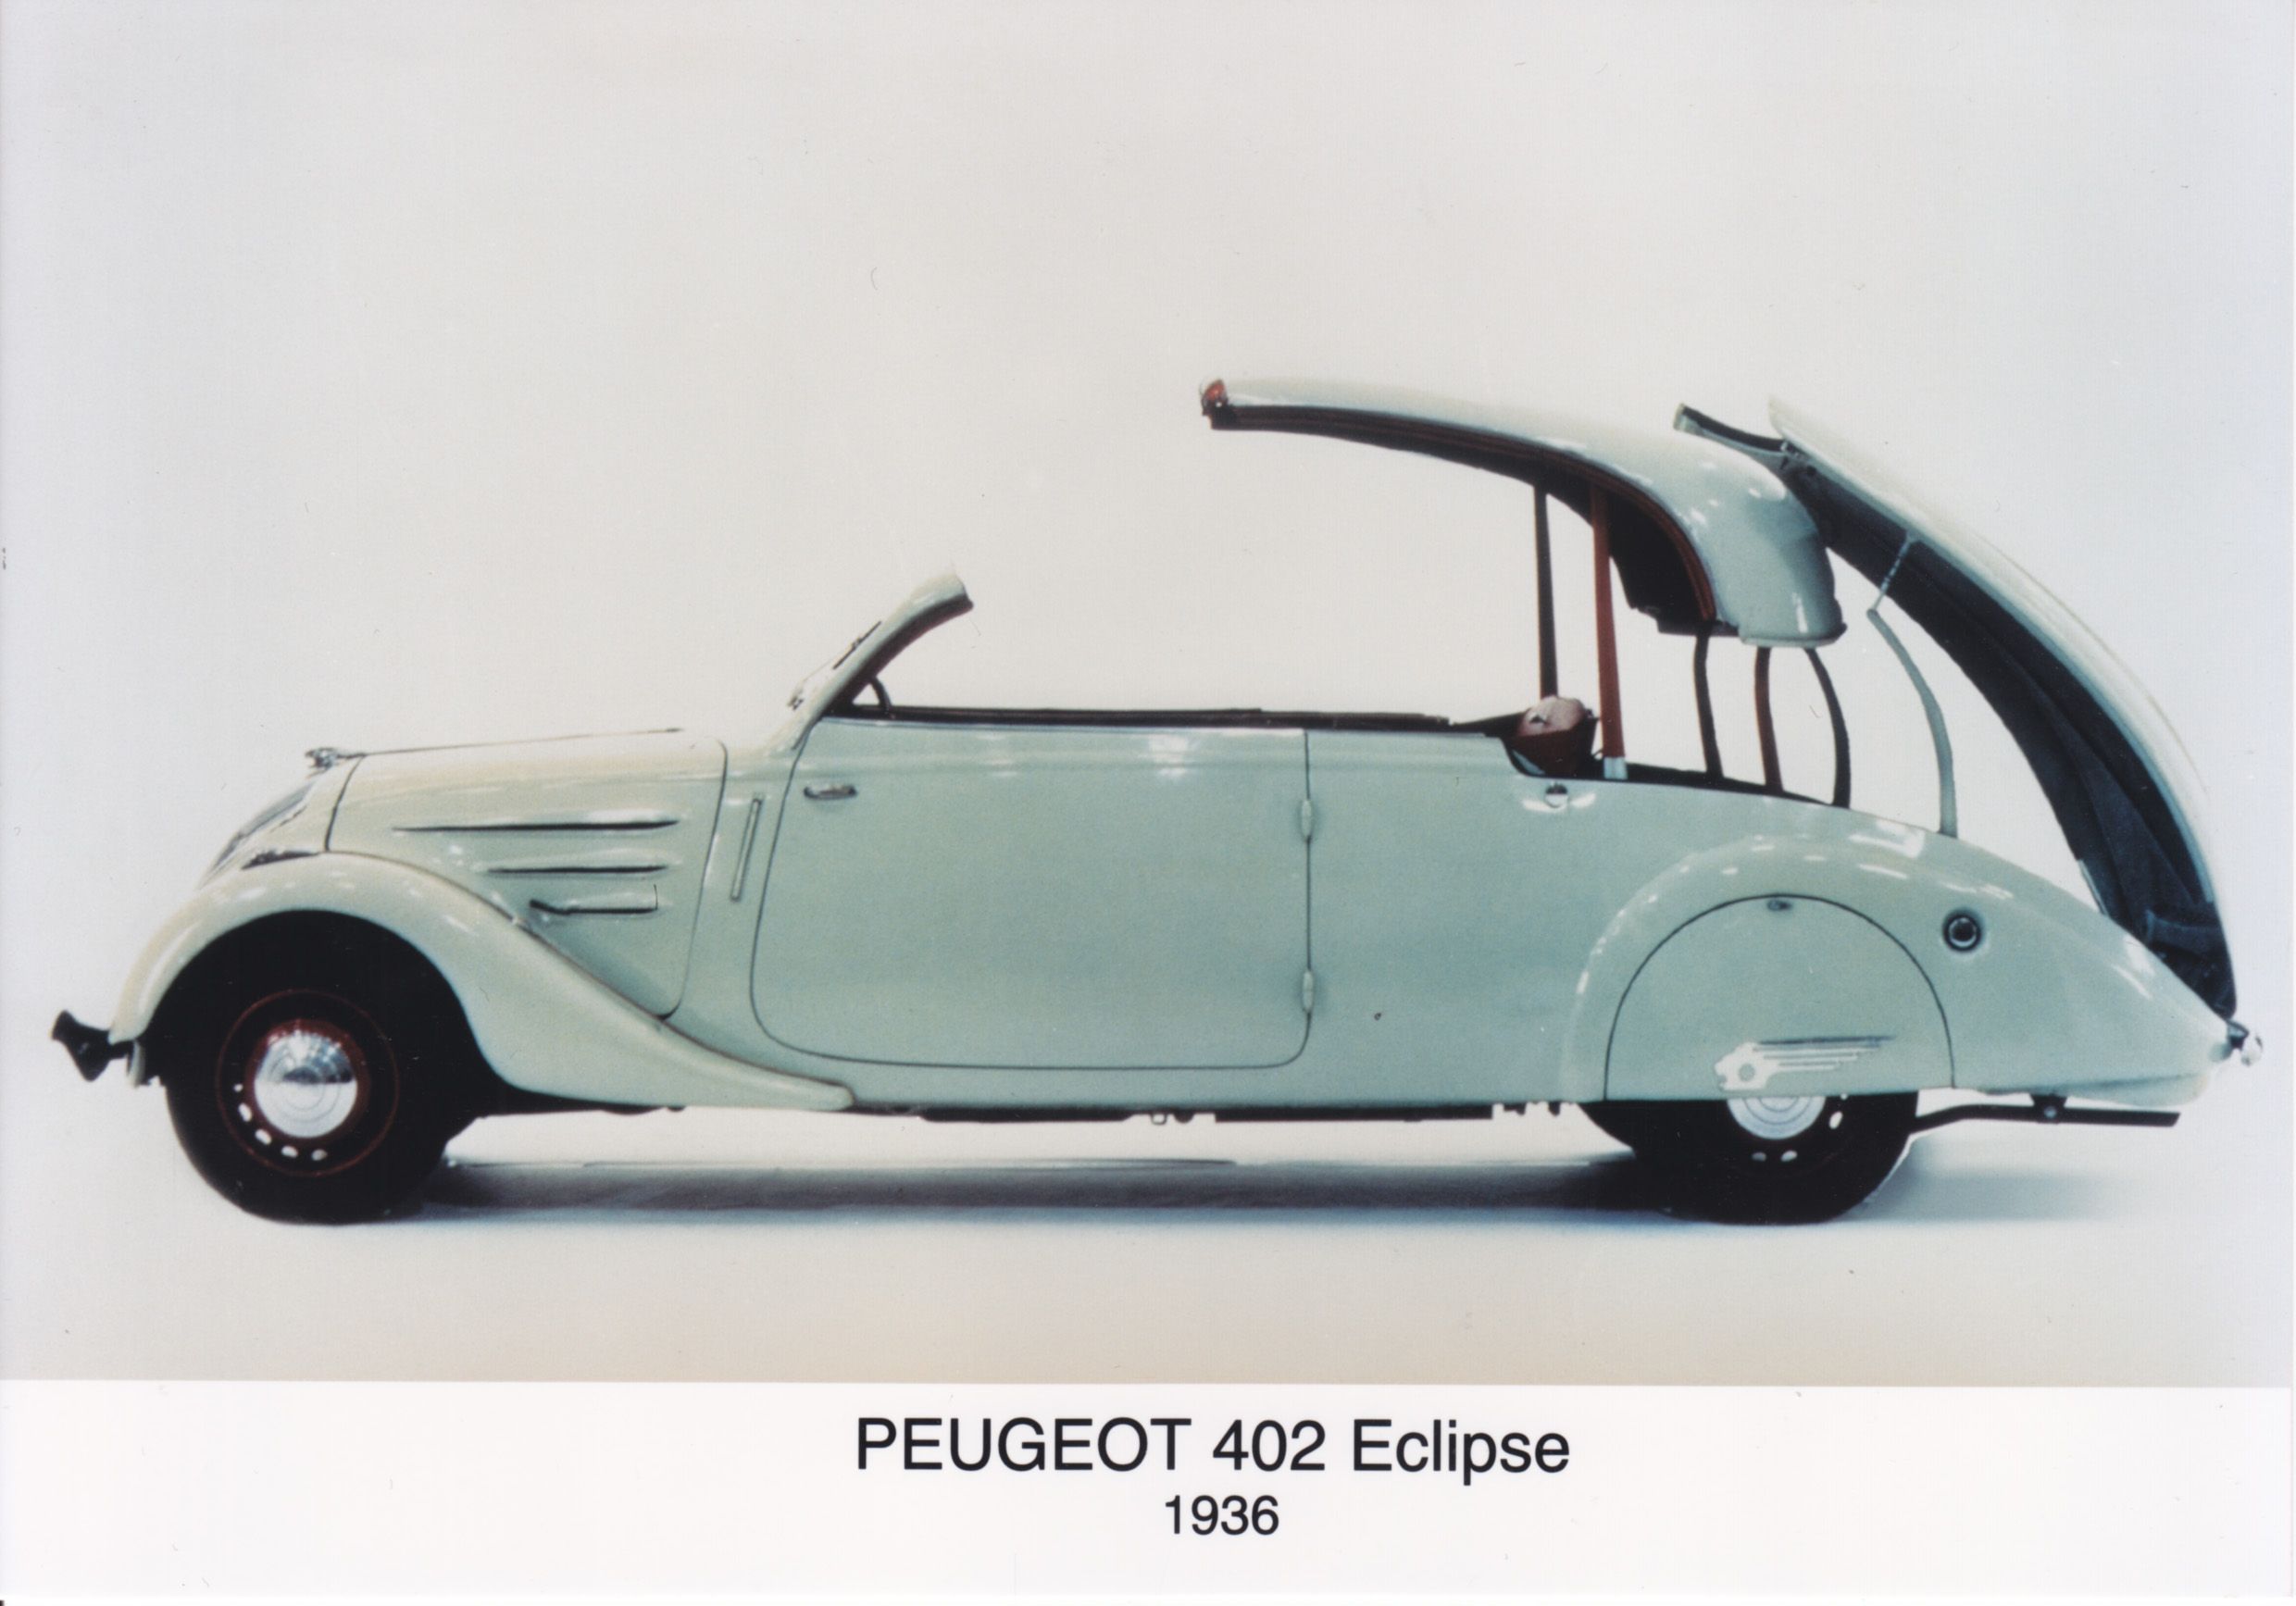 Peugeot 402 Eclipse Wallpapers